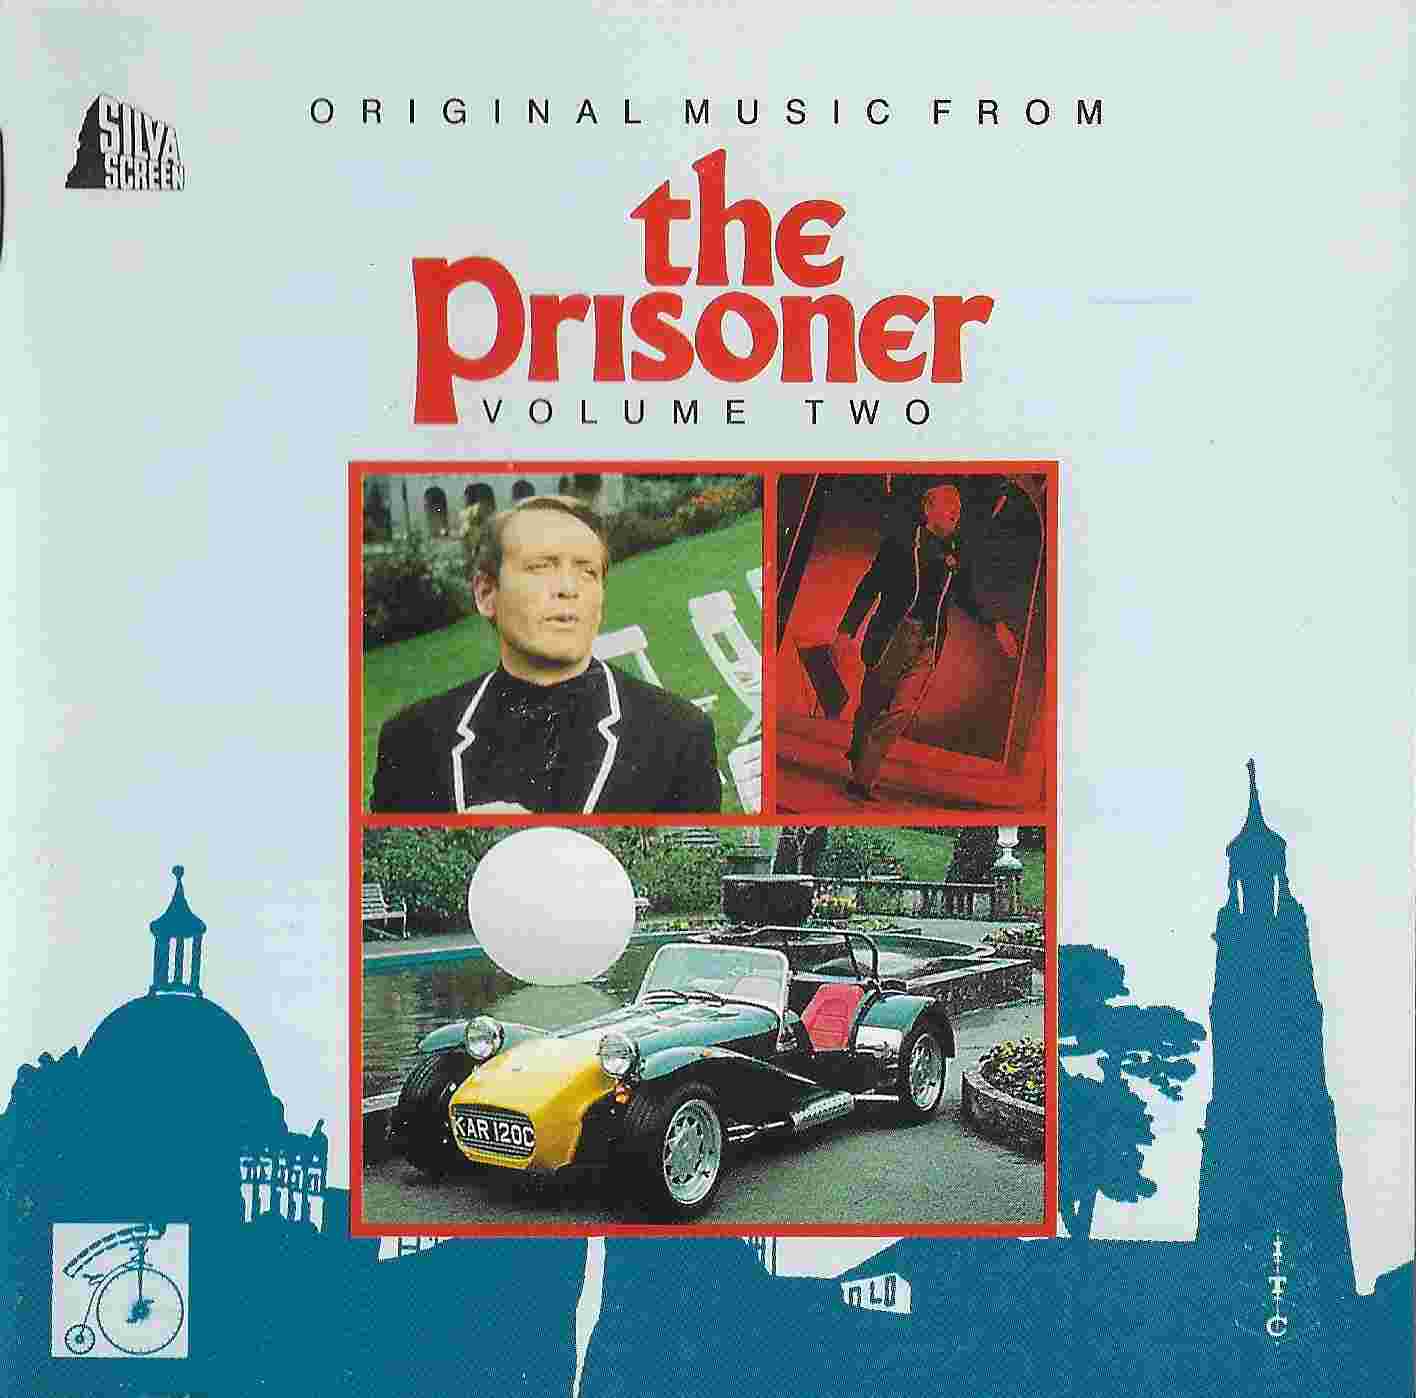 Picture of FILMCD 084 The prisoner - Volume 2 by artist Various from ITV, Channel 4 and Channel 5 cds library